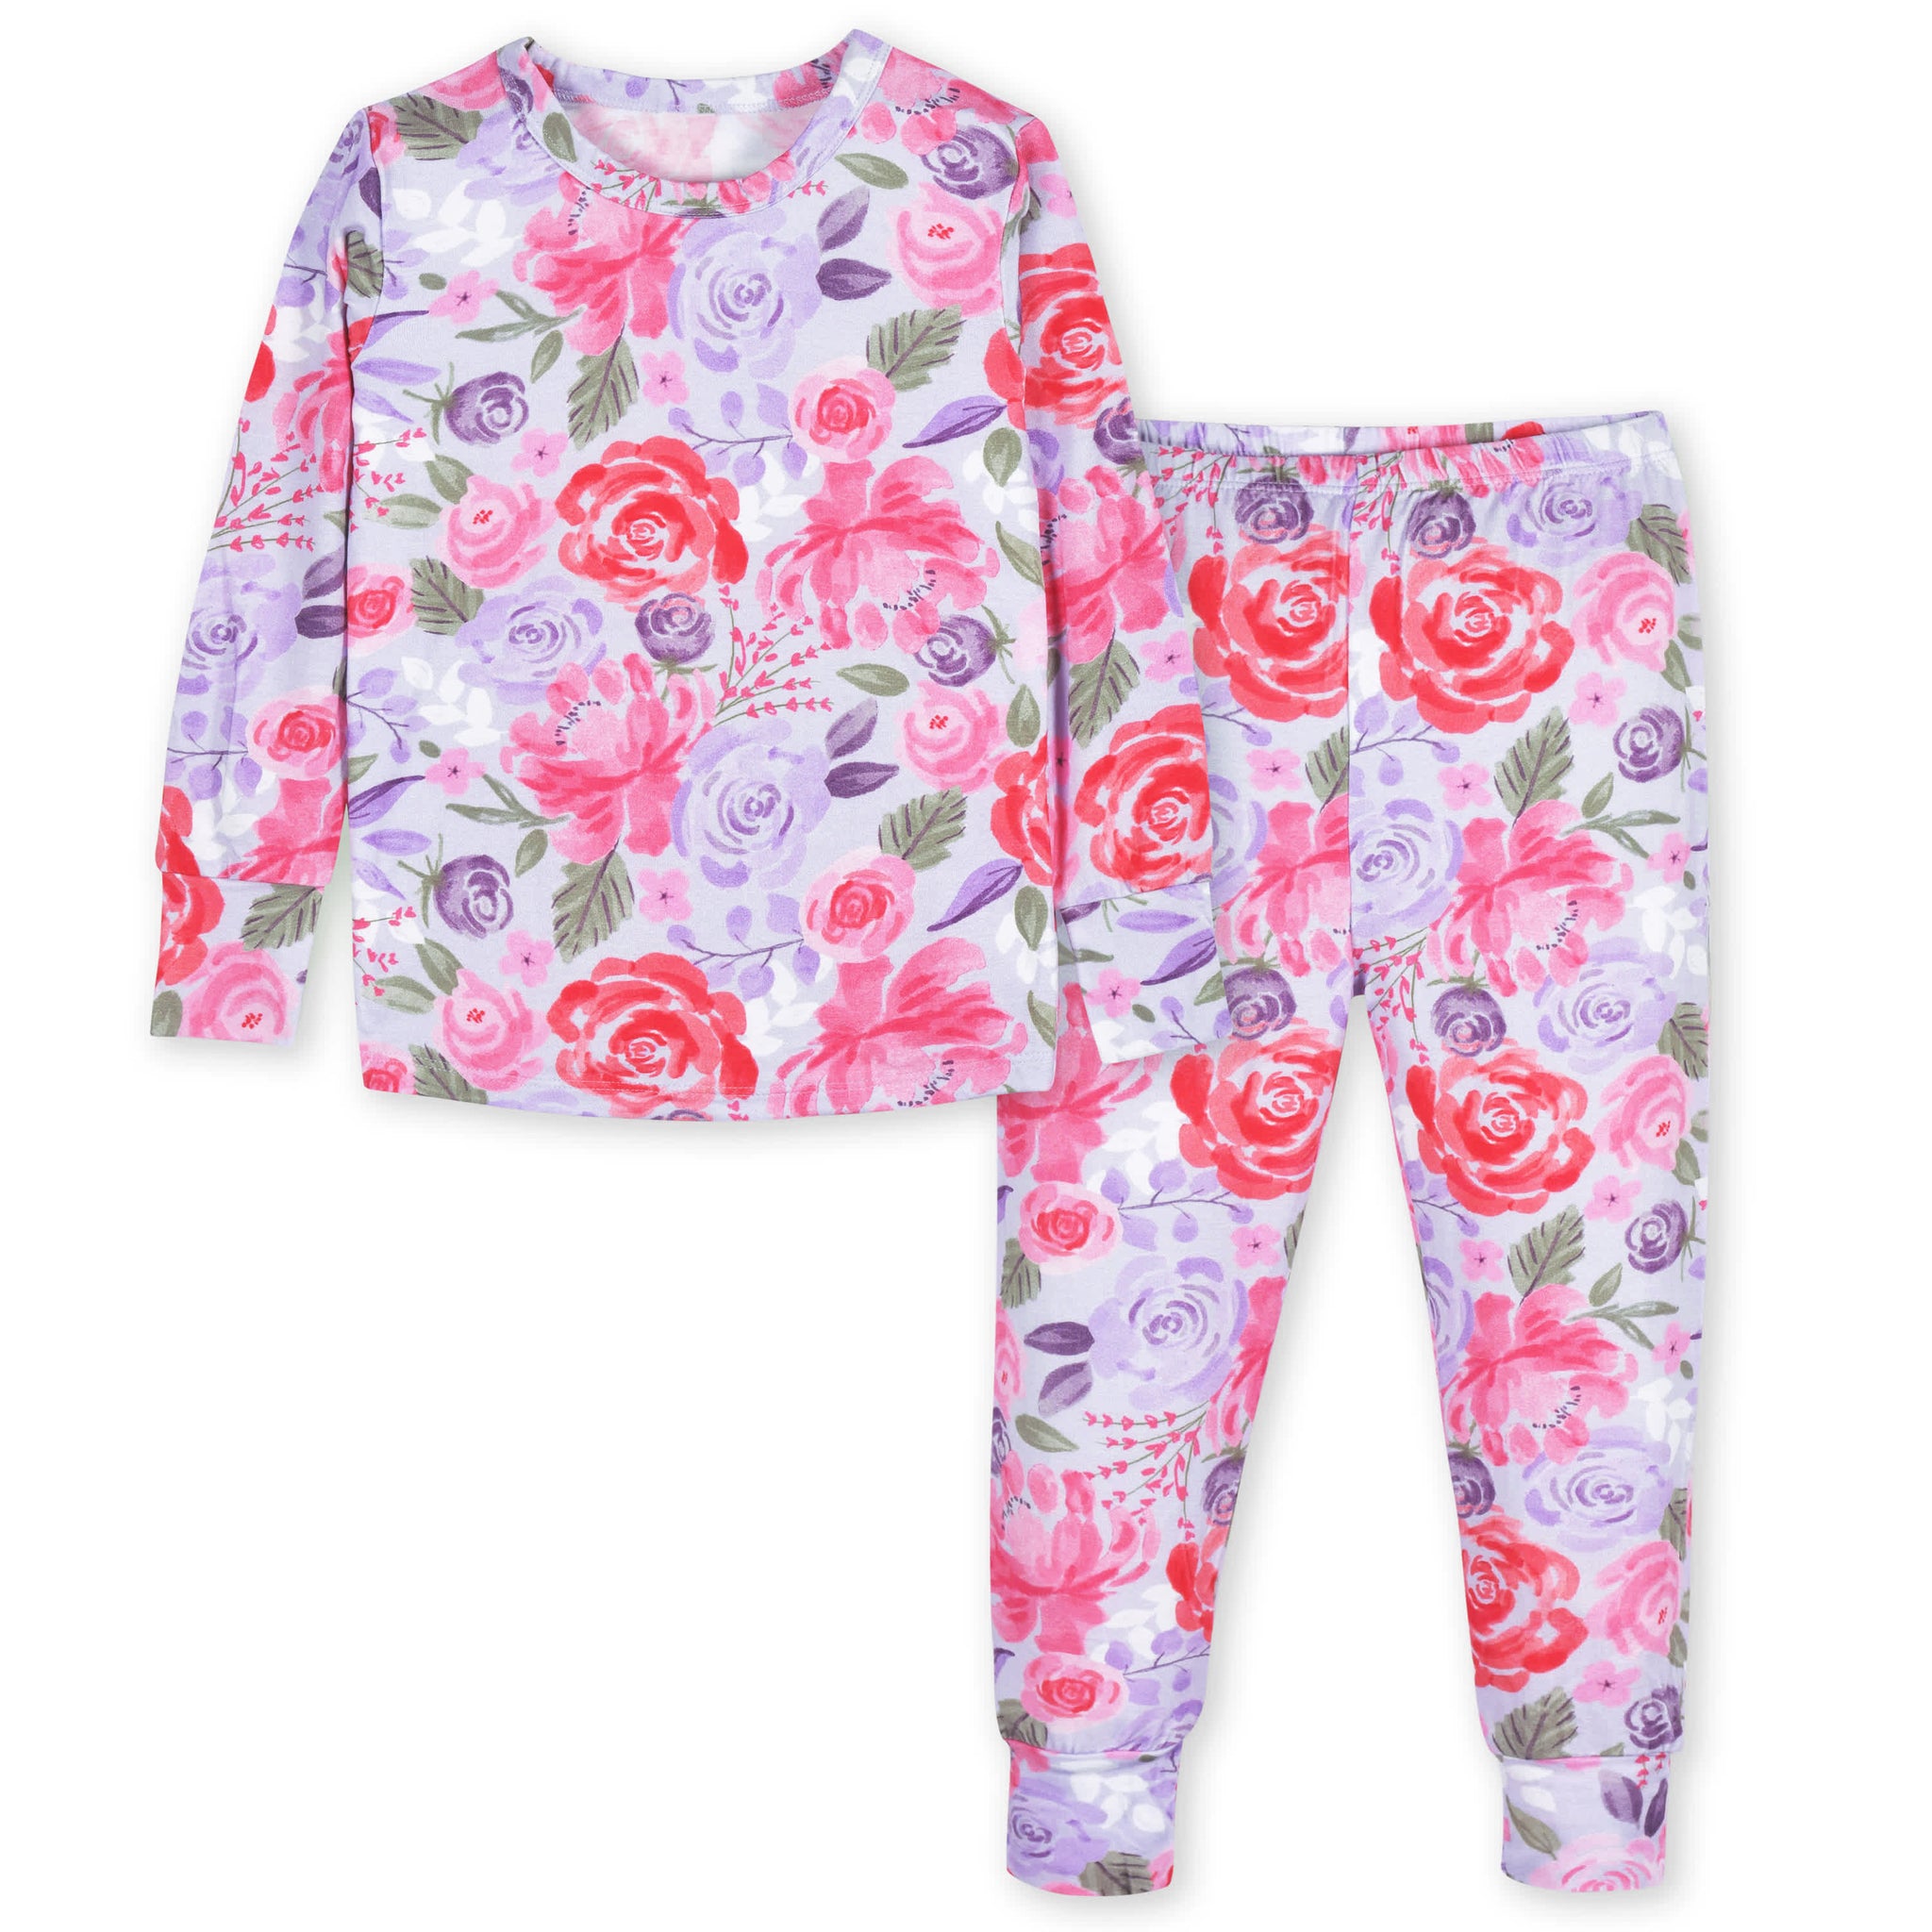 2-Piece Infant & Toddler Girls Lilac Garden Buttery Soft Viscose Made from Eucalyptus Snug Fit Pajamas-Gerber Childrenswear Wholesale